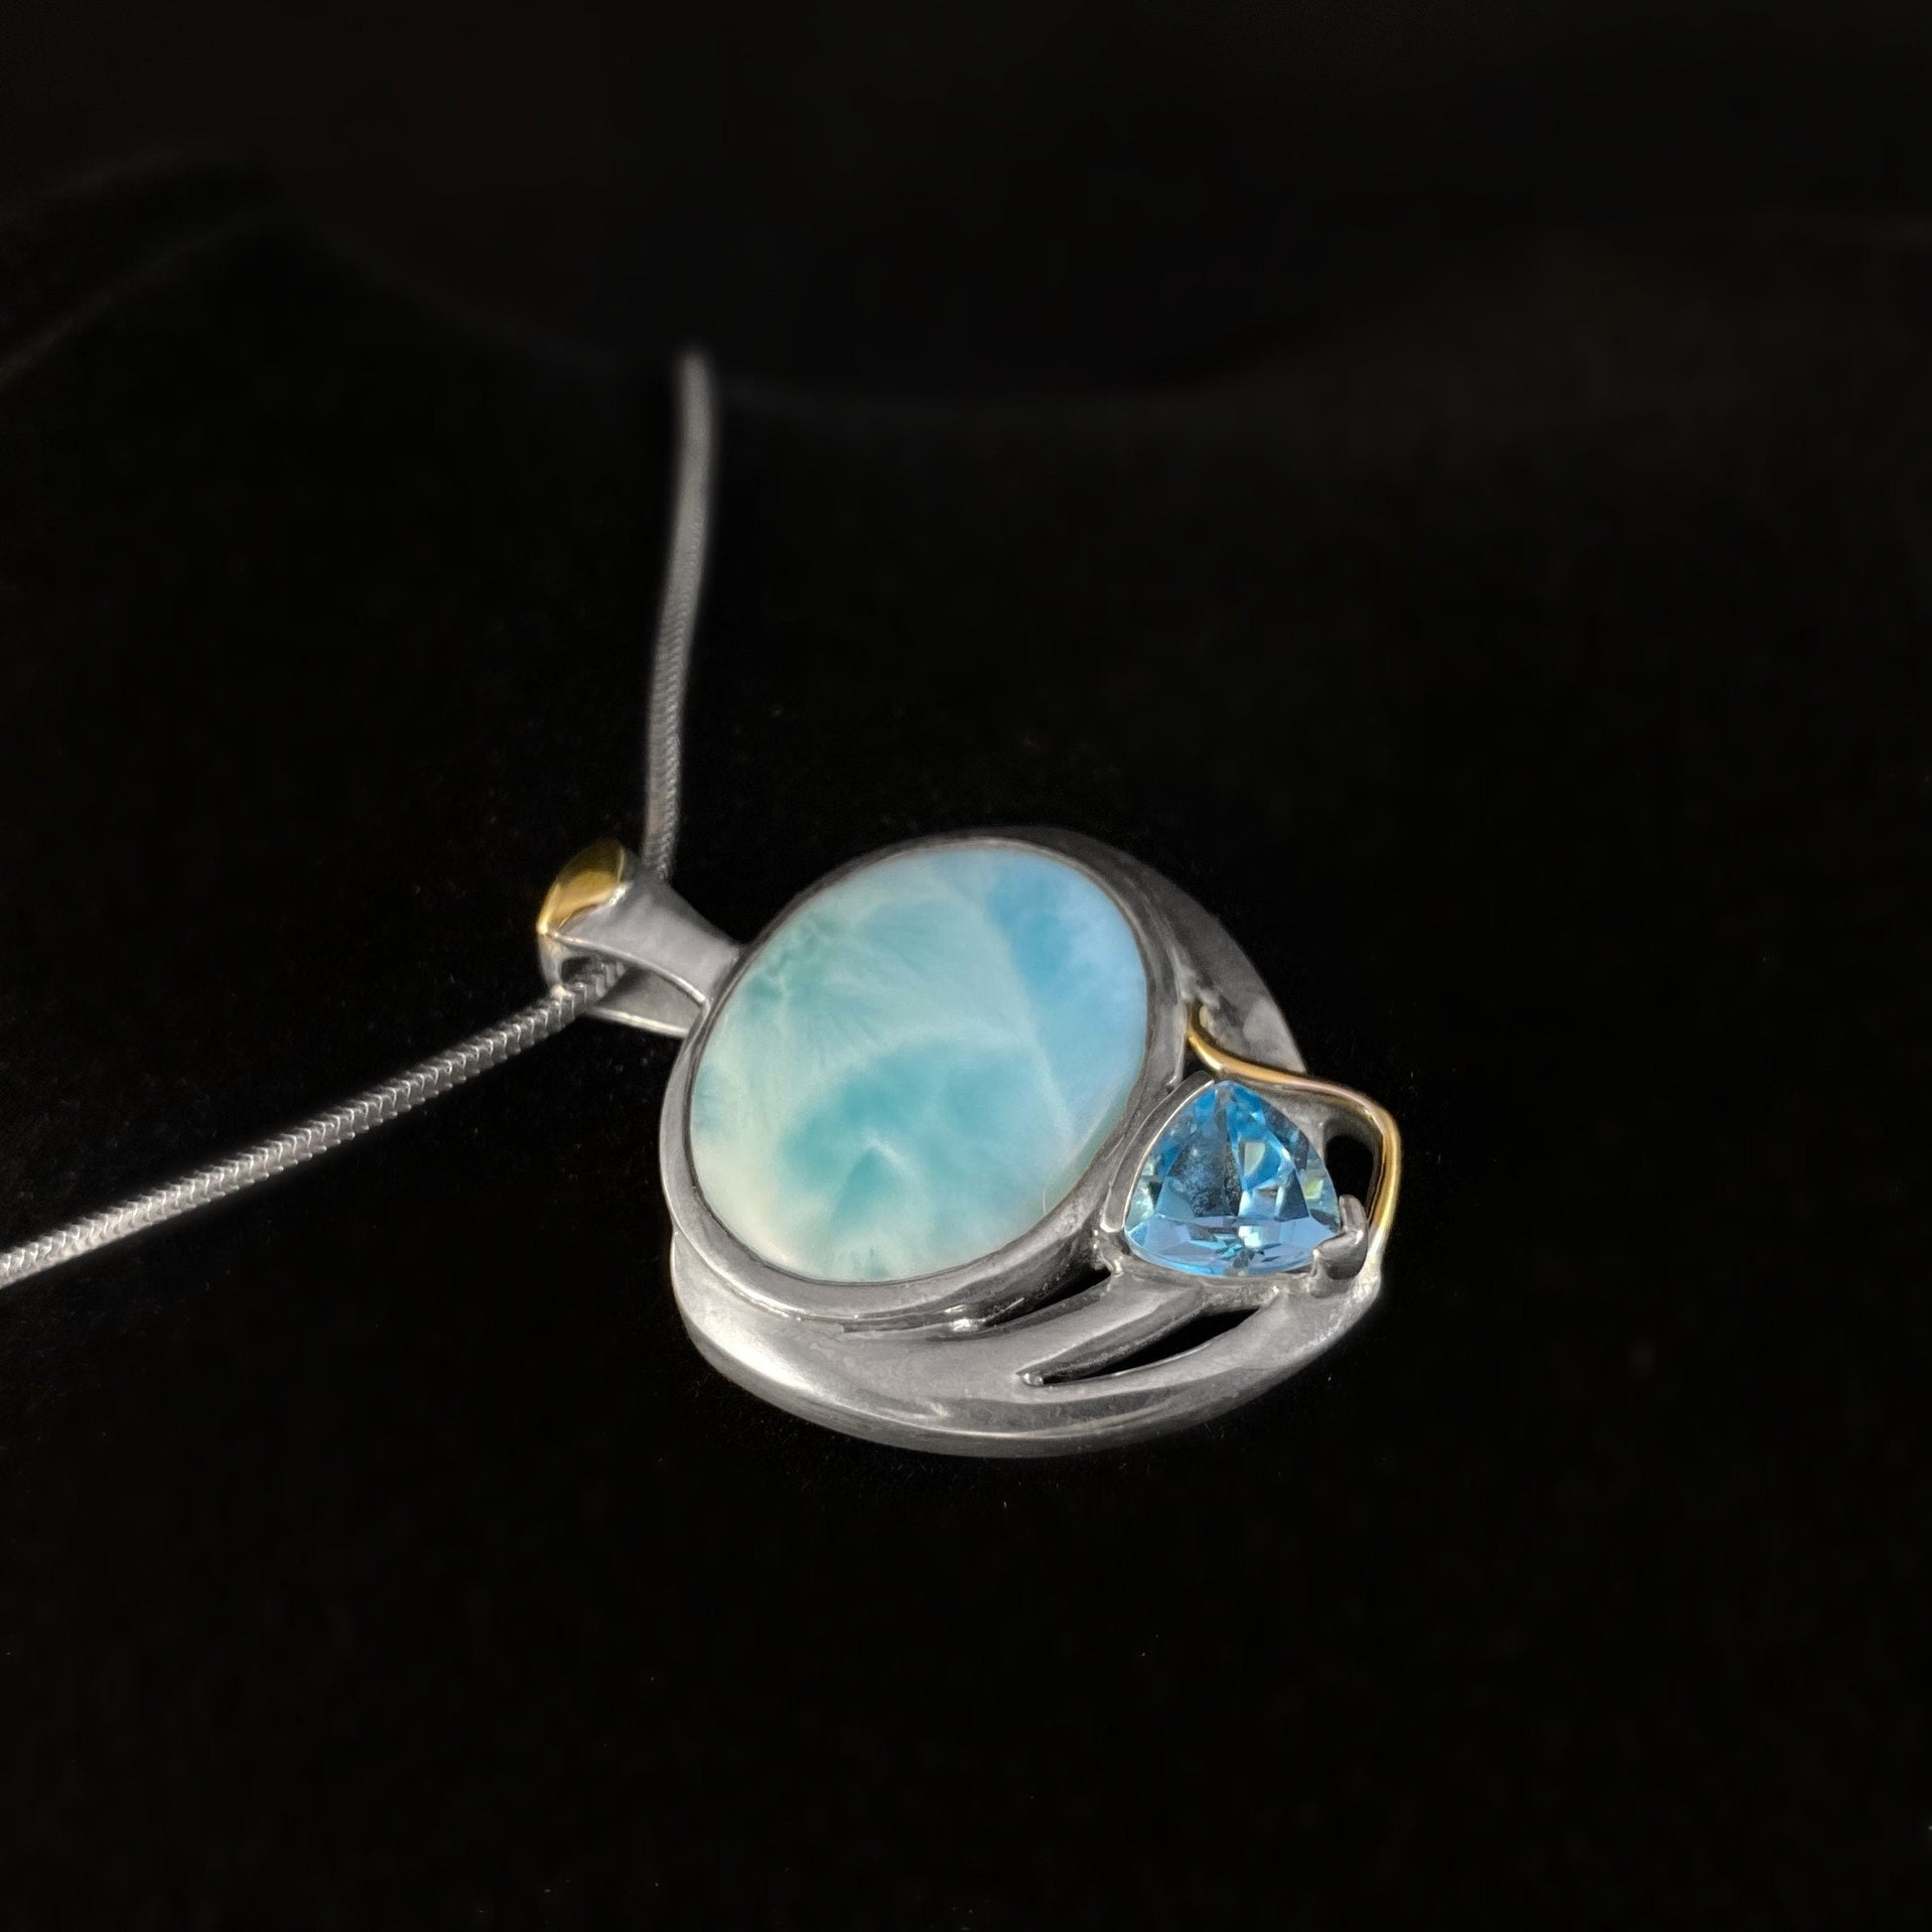 Marahlago Larimar and Sterling Silver Lena Necklace